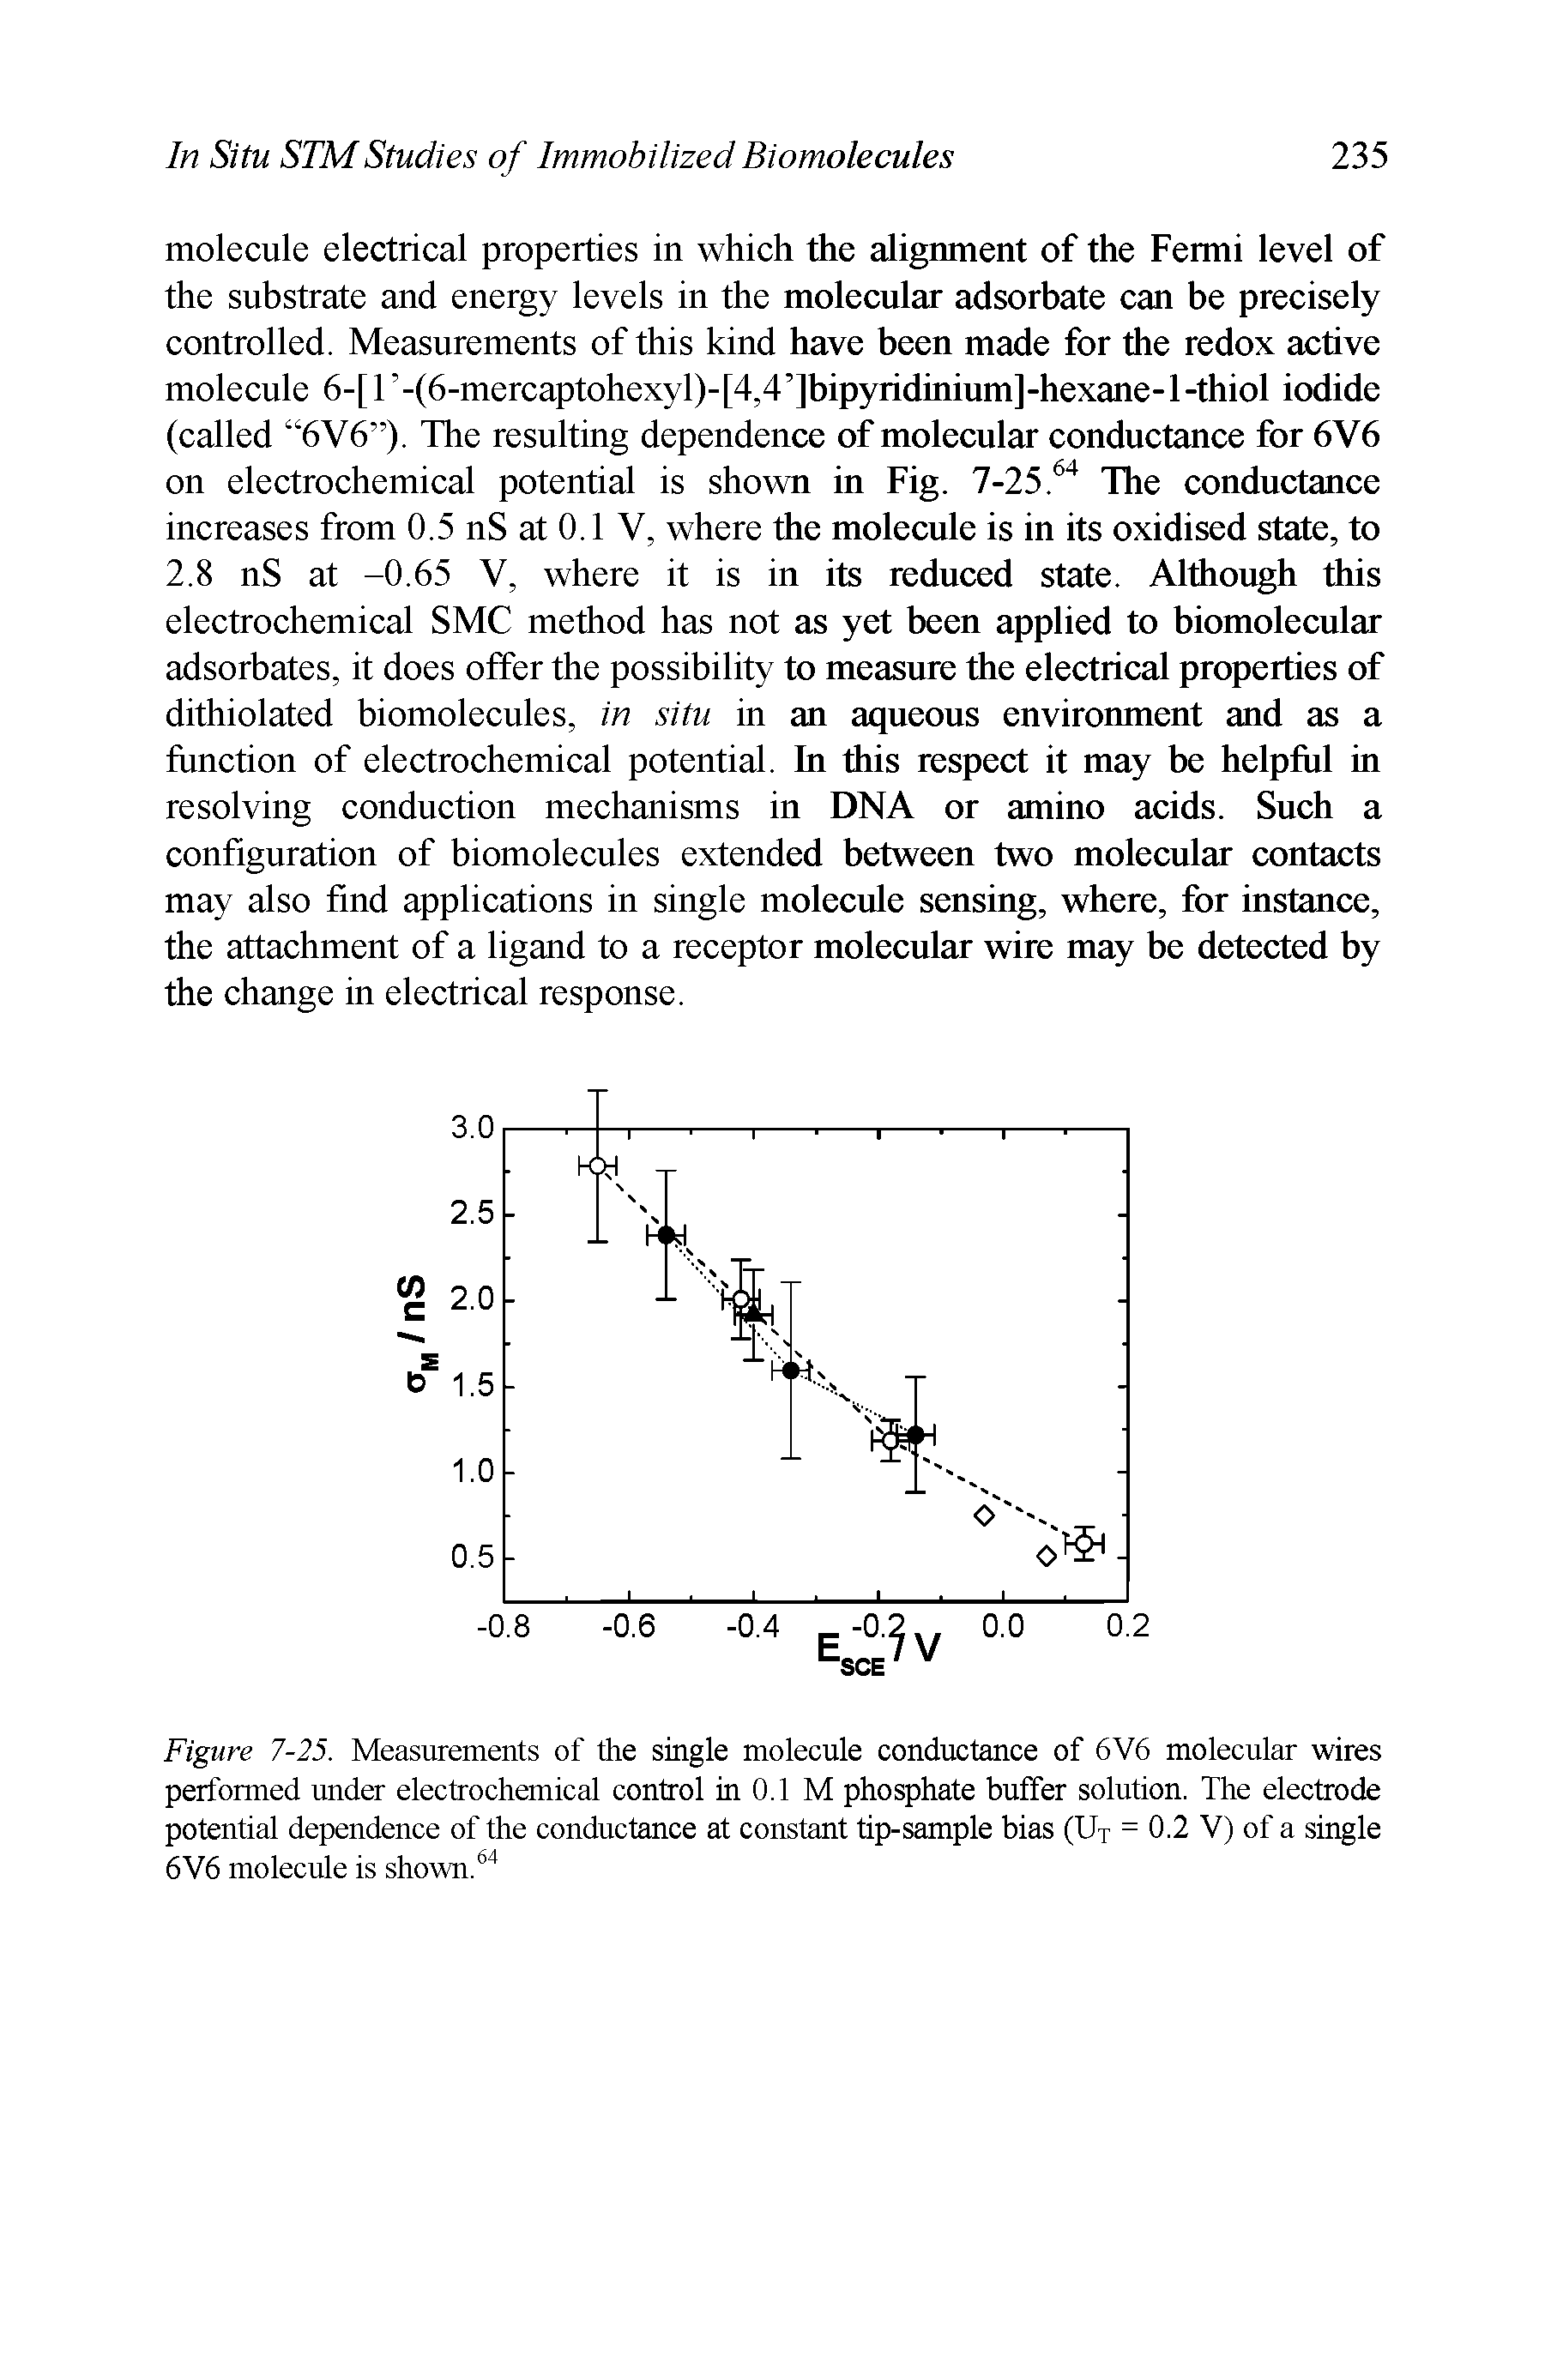 Figure 7-25. Measurements of the single molecule conductance of 6V6 molecular wires performed under electrochemical control in 0.1 M phosphate buffer solution. The electrode potential dependence of the conductance at constant tip-sample bias (Ut = 0.2 V) of a single 6V6 molecule is shown. " ...